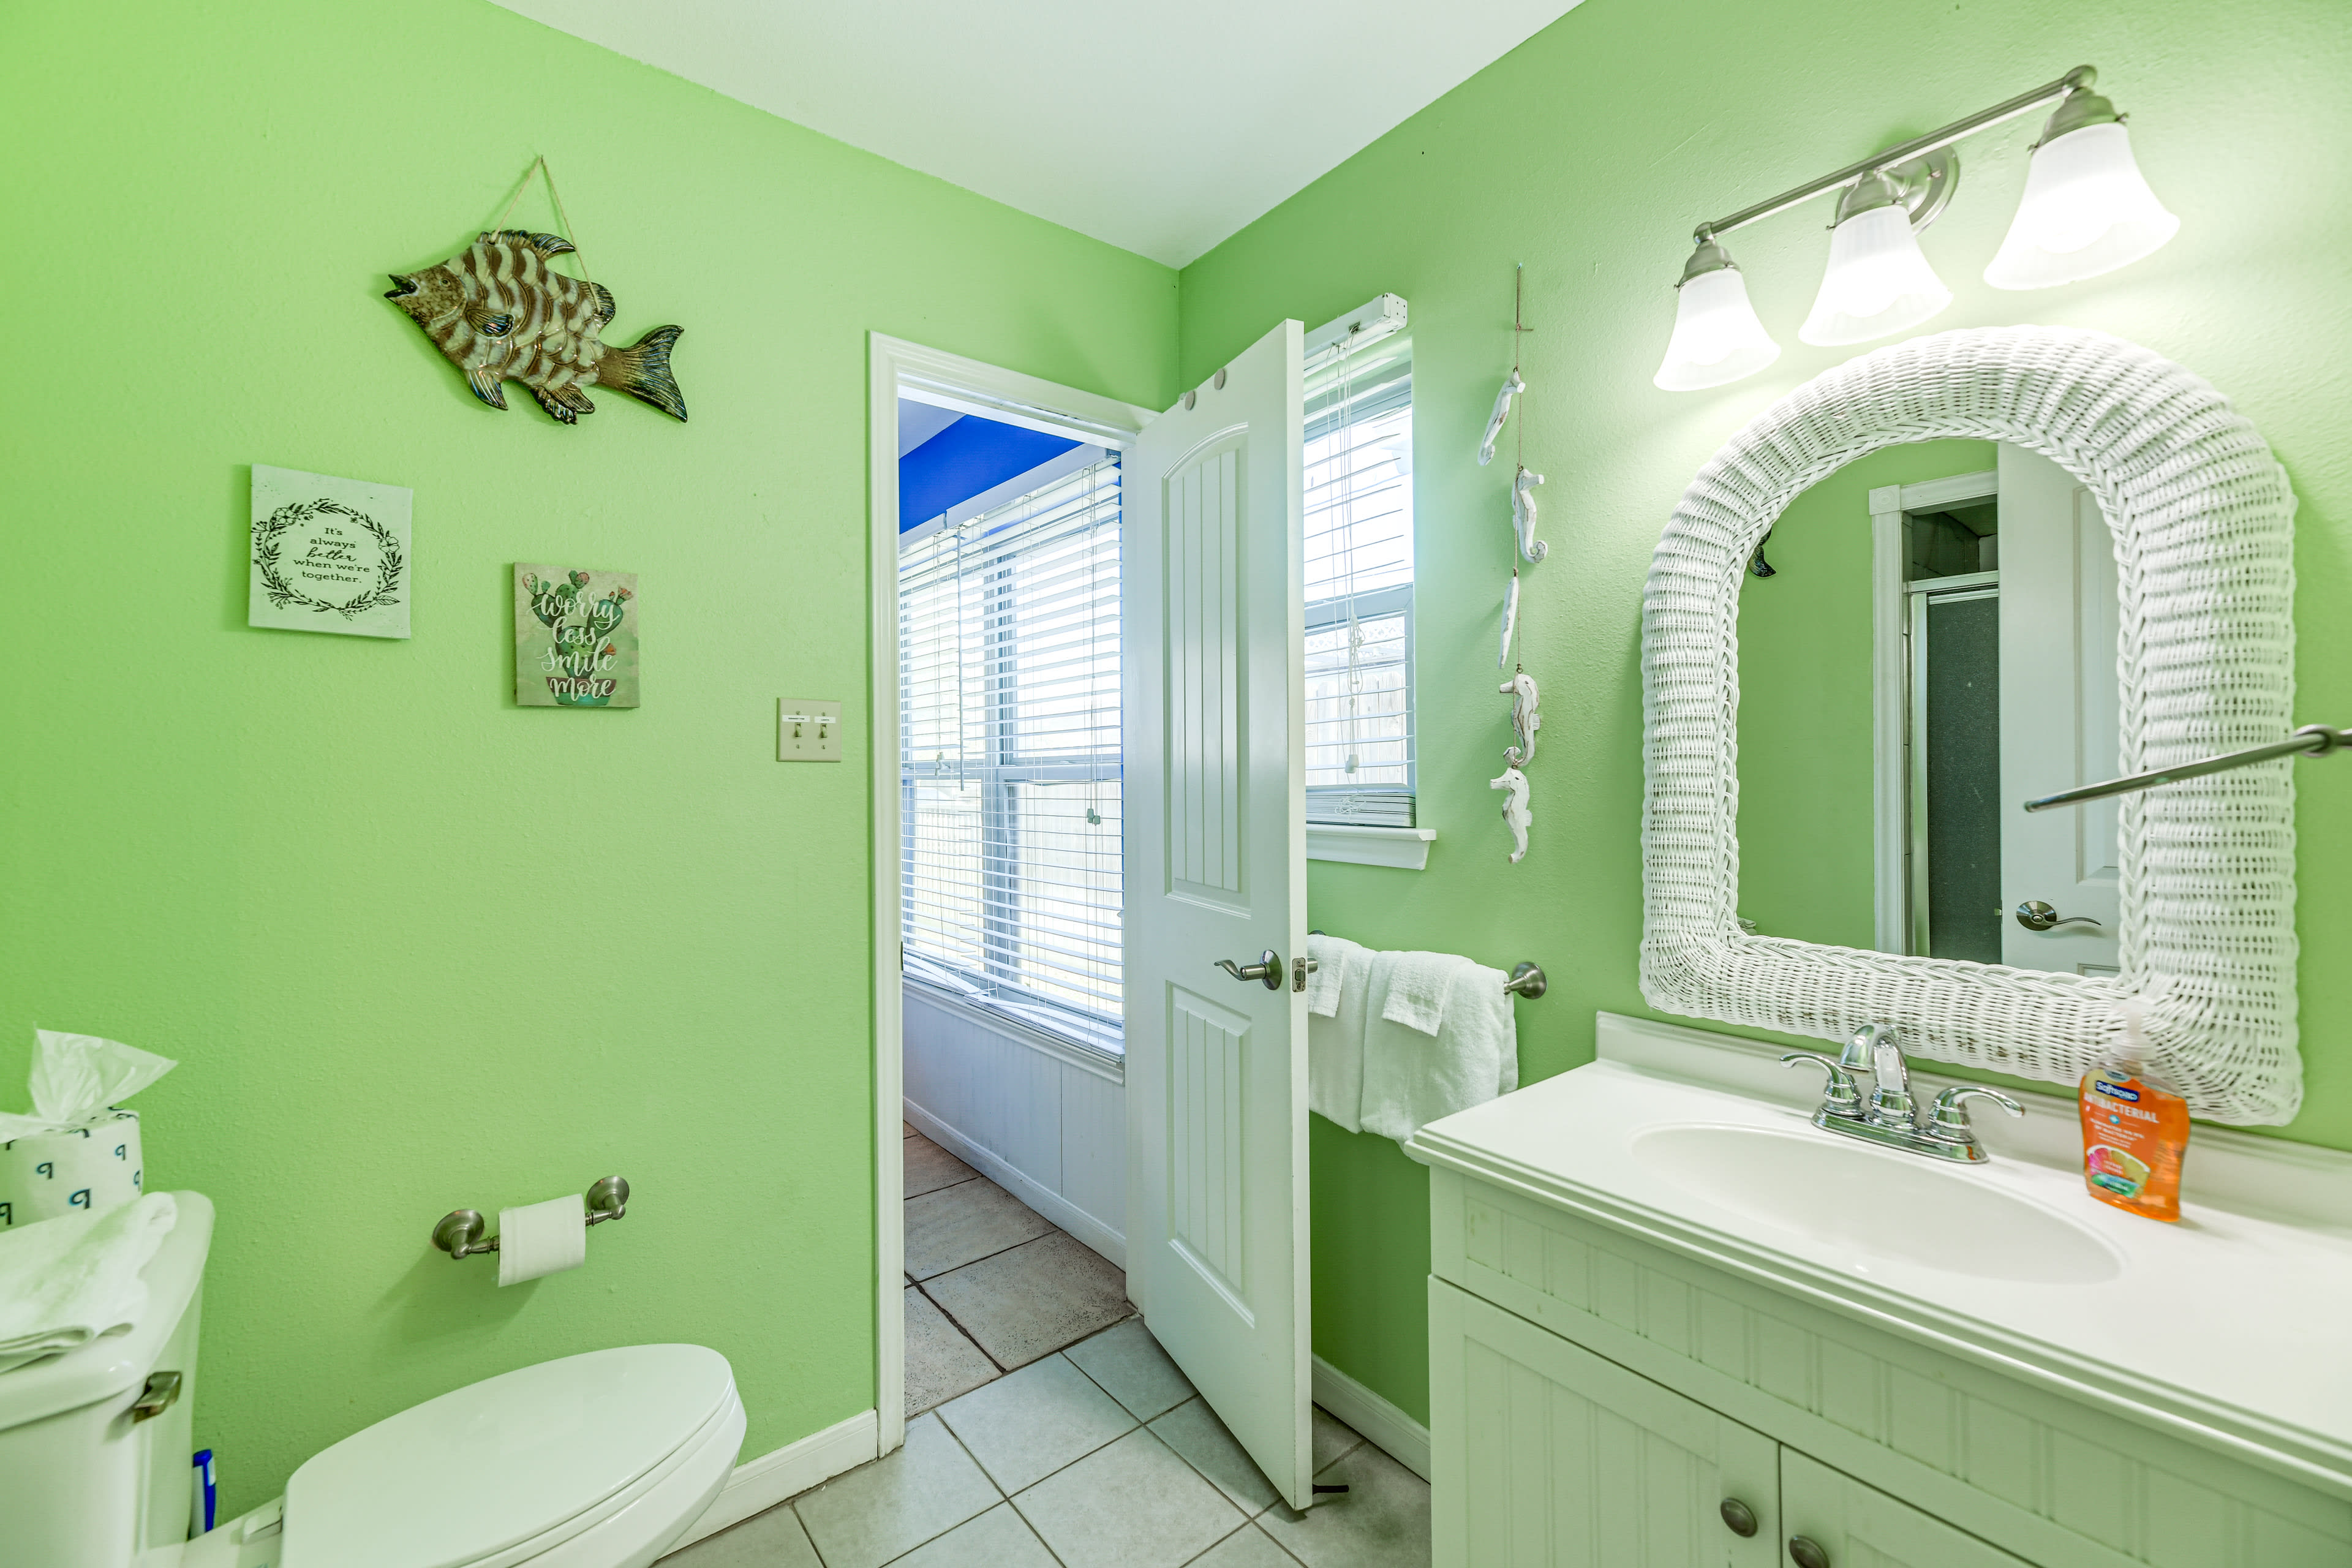 Jack-and-Jill Bathroom | Complimentary Toiletries | Towels Provided